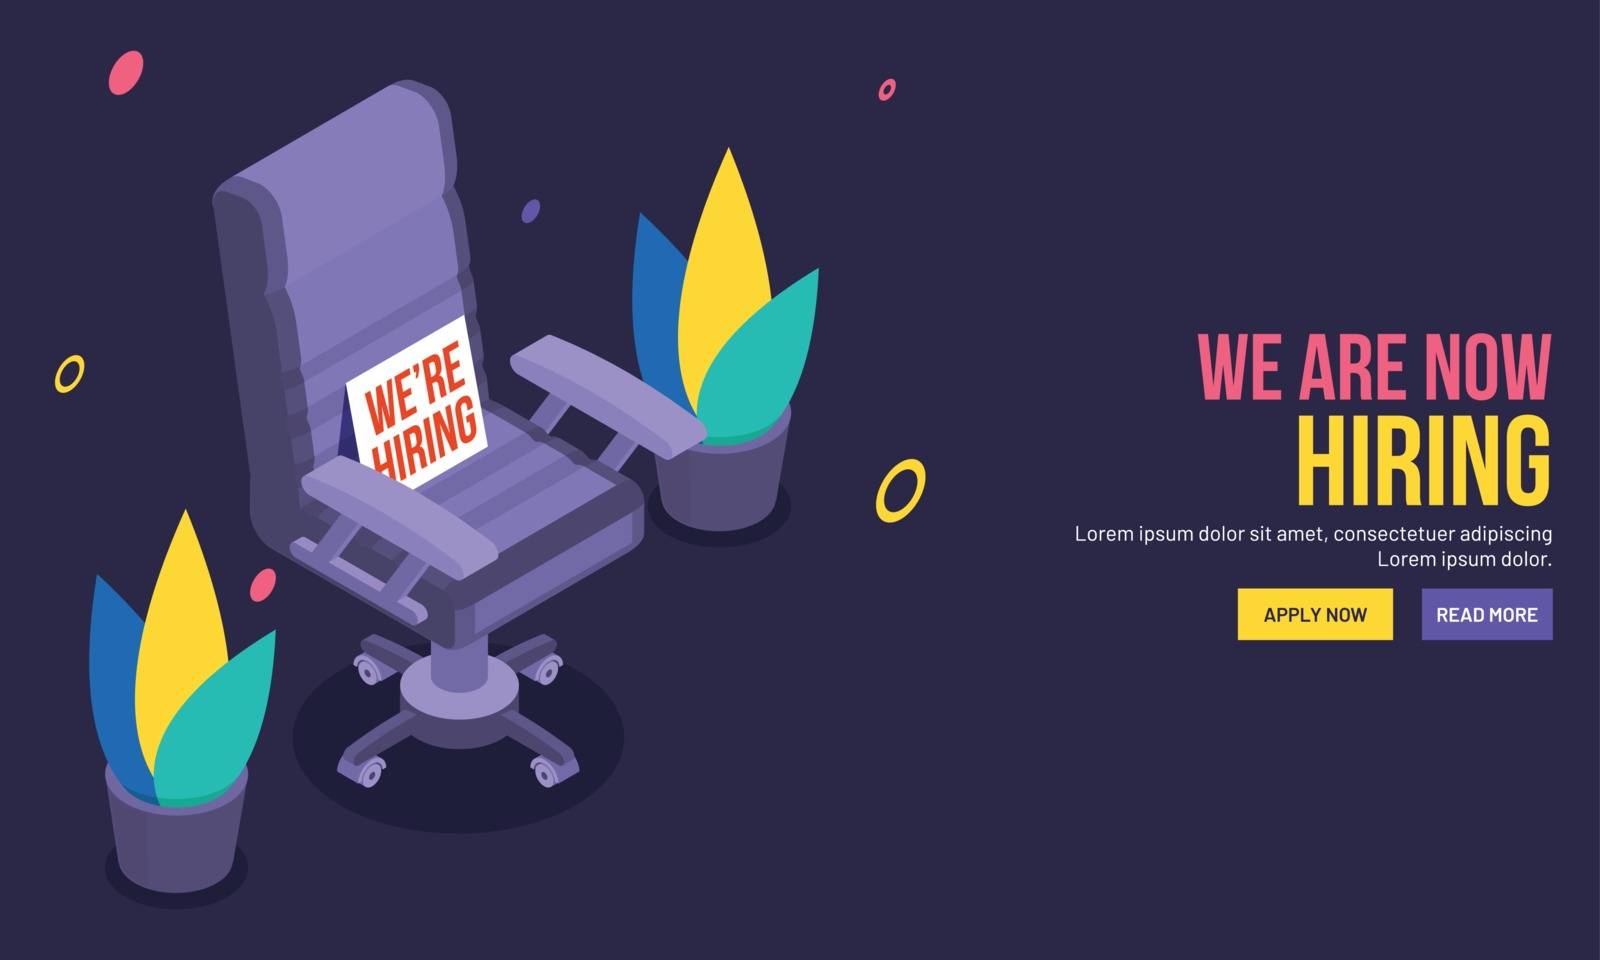 Responsive web template design with illustration of armchair for repotated designation on blue background for We Are Hiring concept.